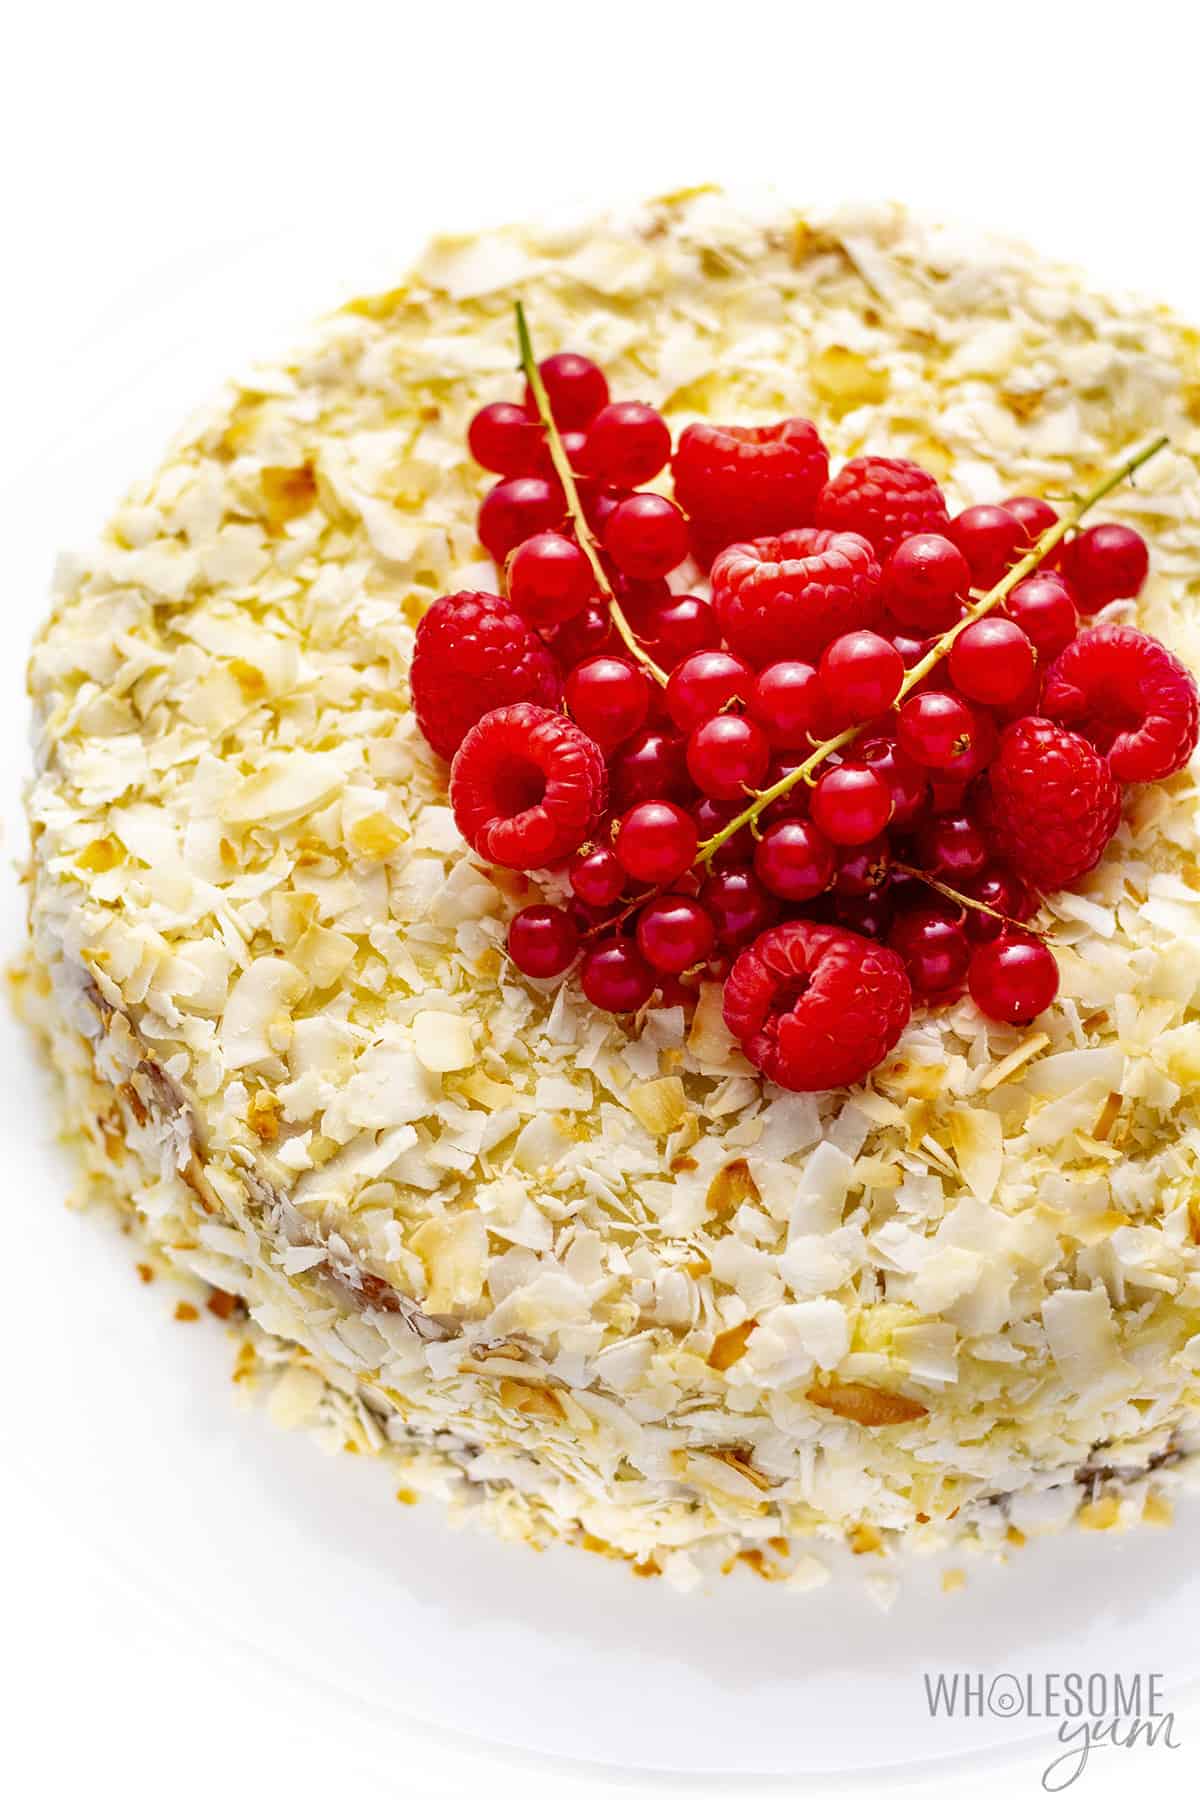 Full coconut flour cake topped with red berries.